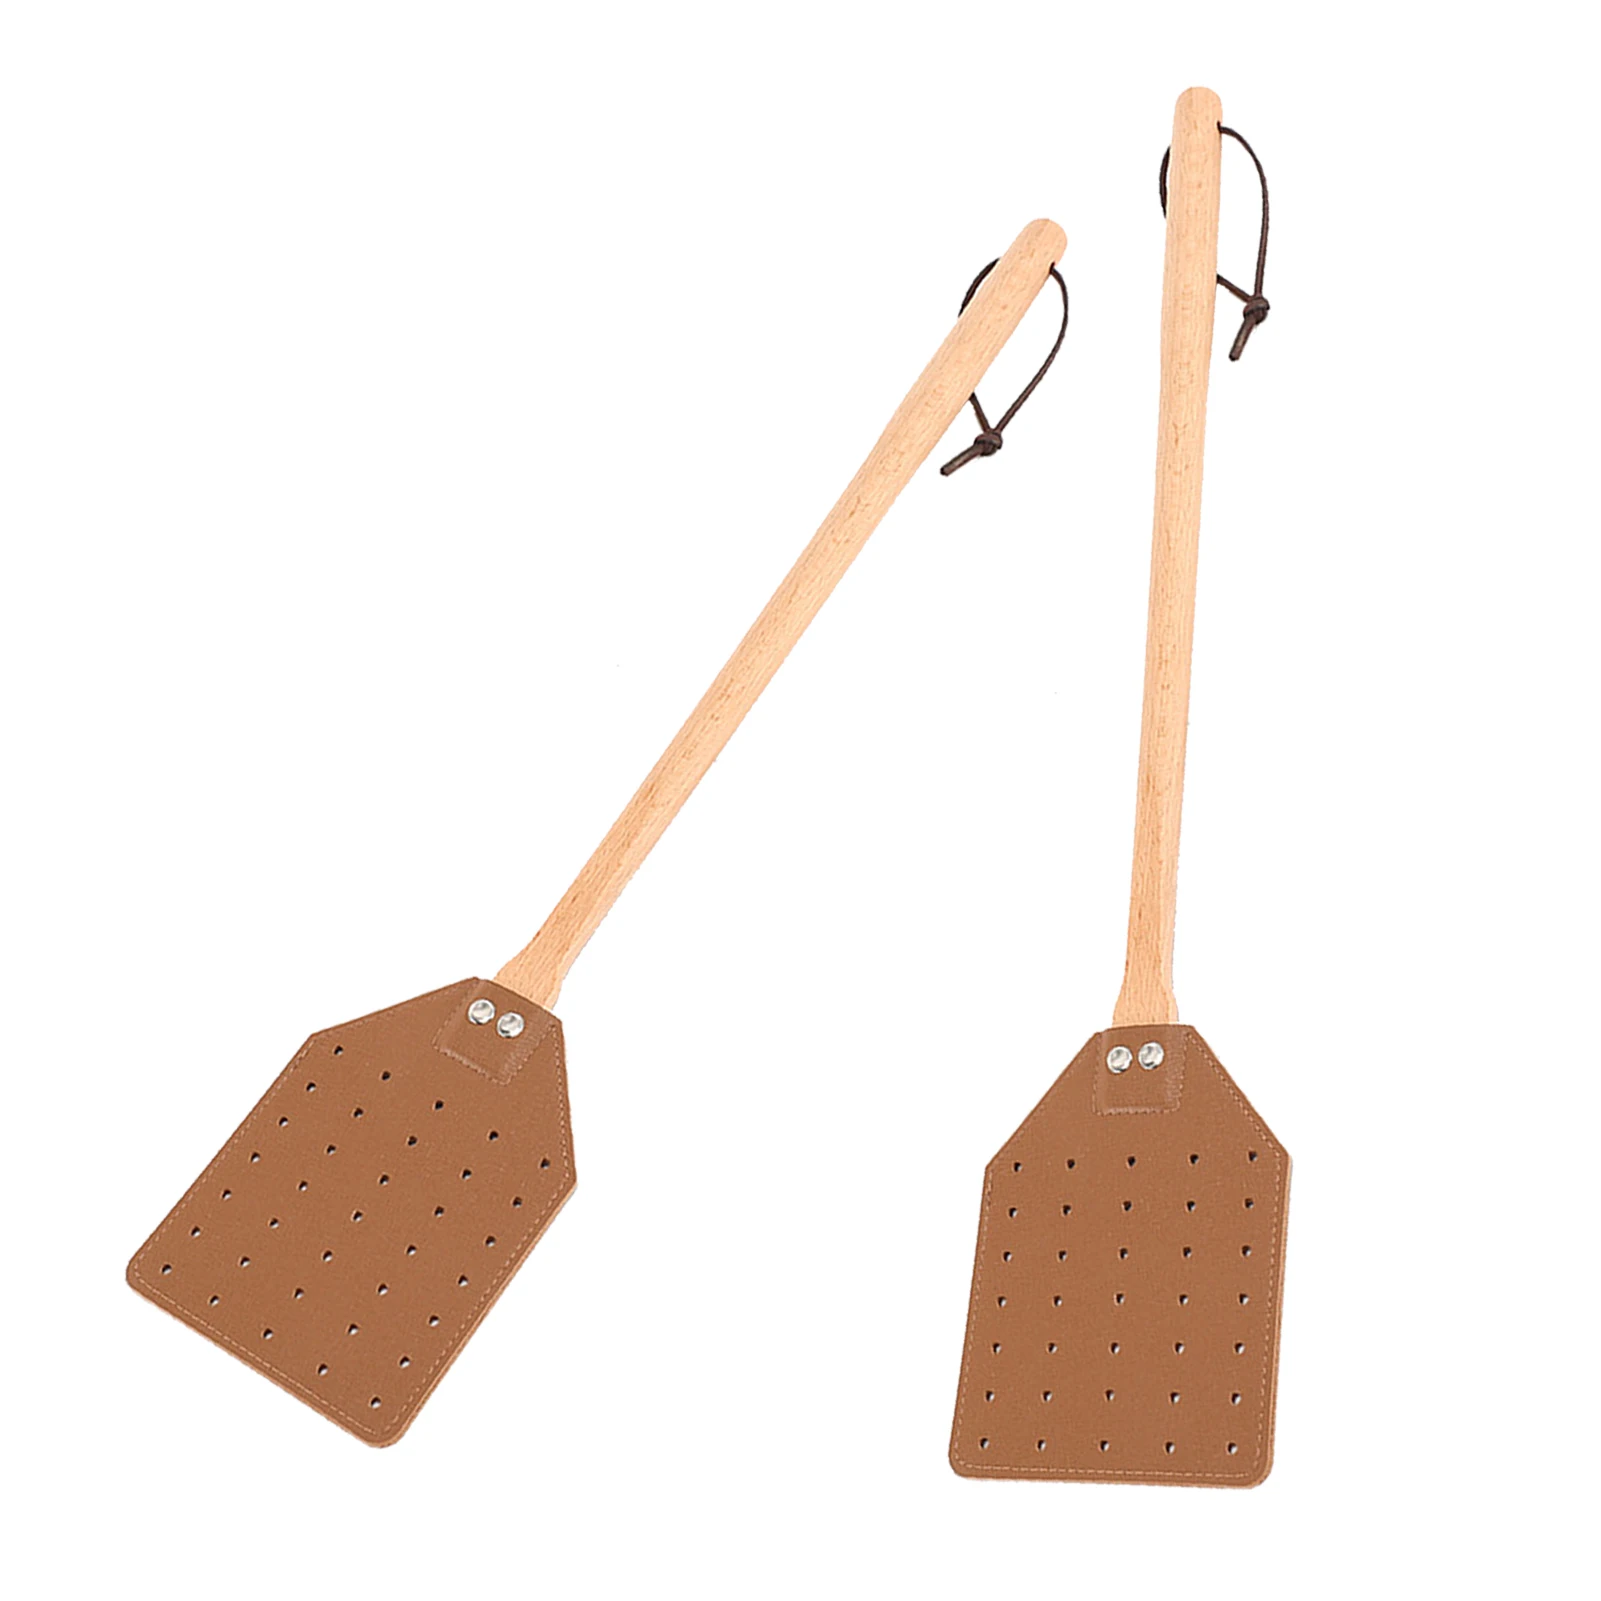 2pcs Rustic Flies Indoor Outdoor Mosquitoes Bees Long Sturdy Kitchen Home Fly Swatter Durable Heavy Duty Wood Handle